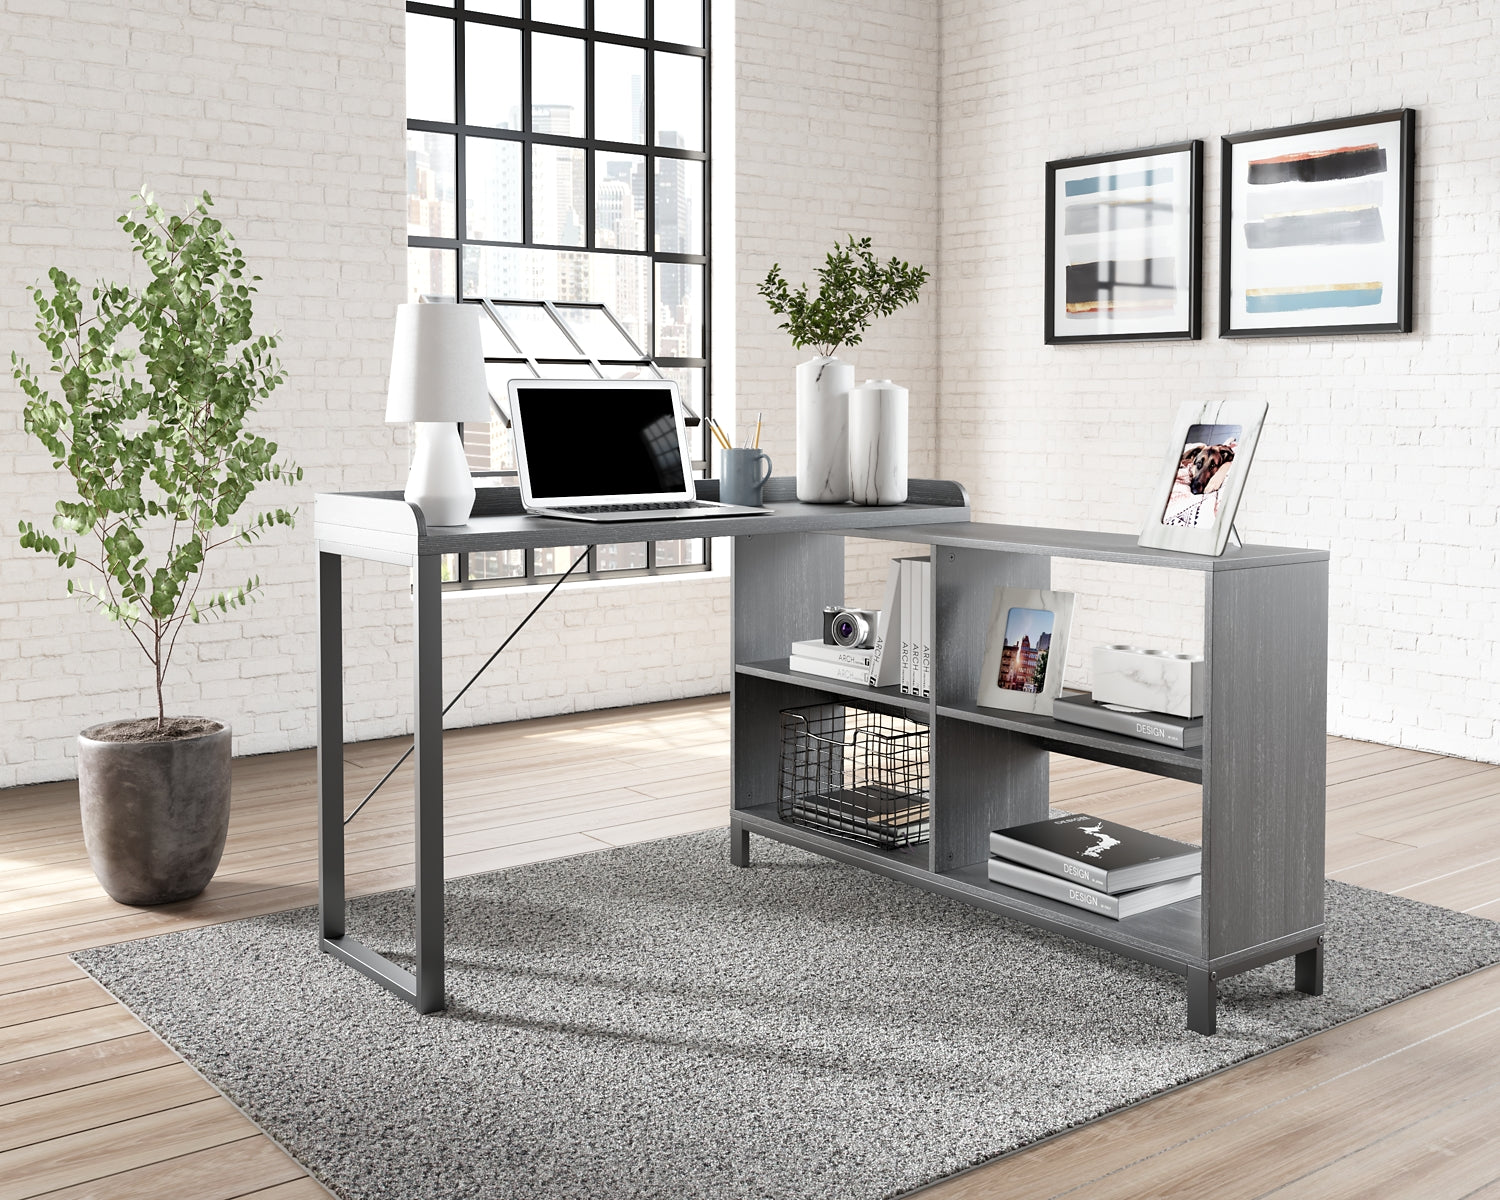 Yarlow Home Office Desk and Storage